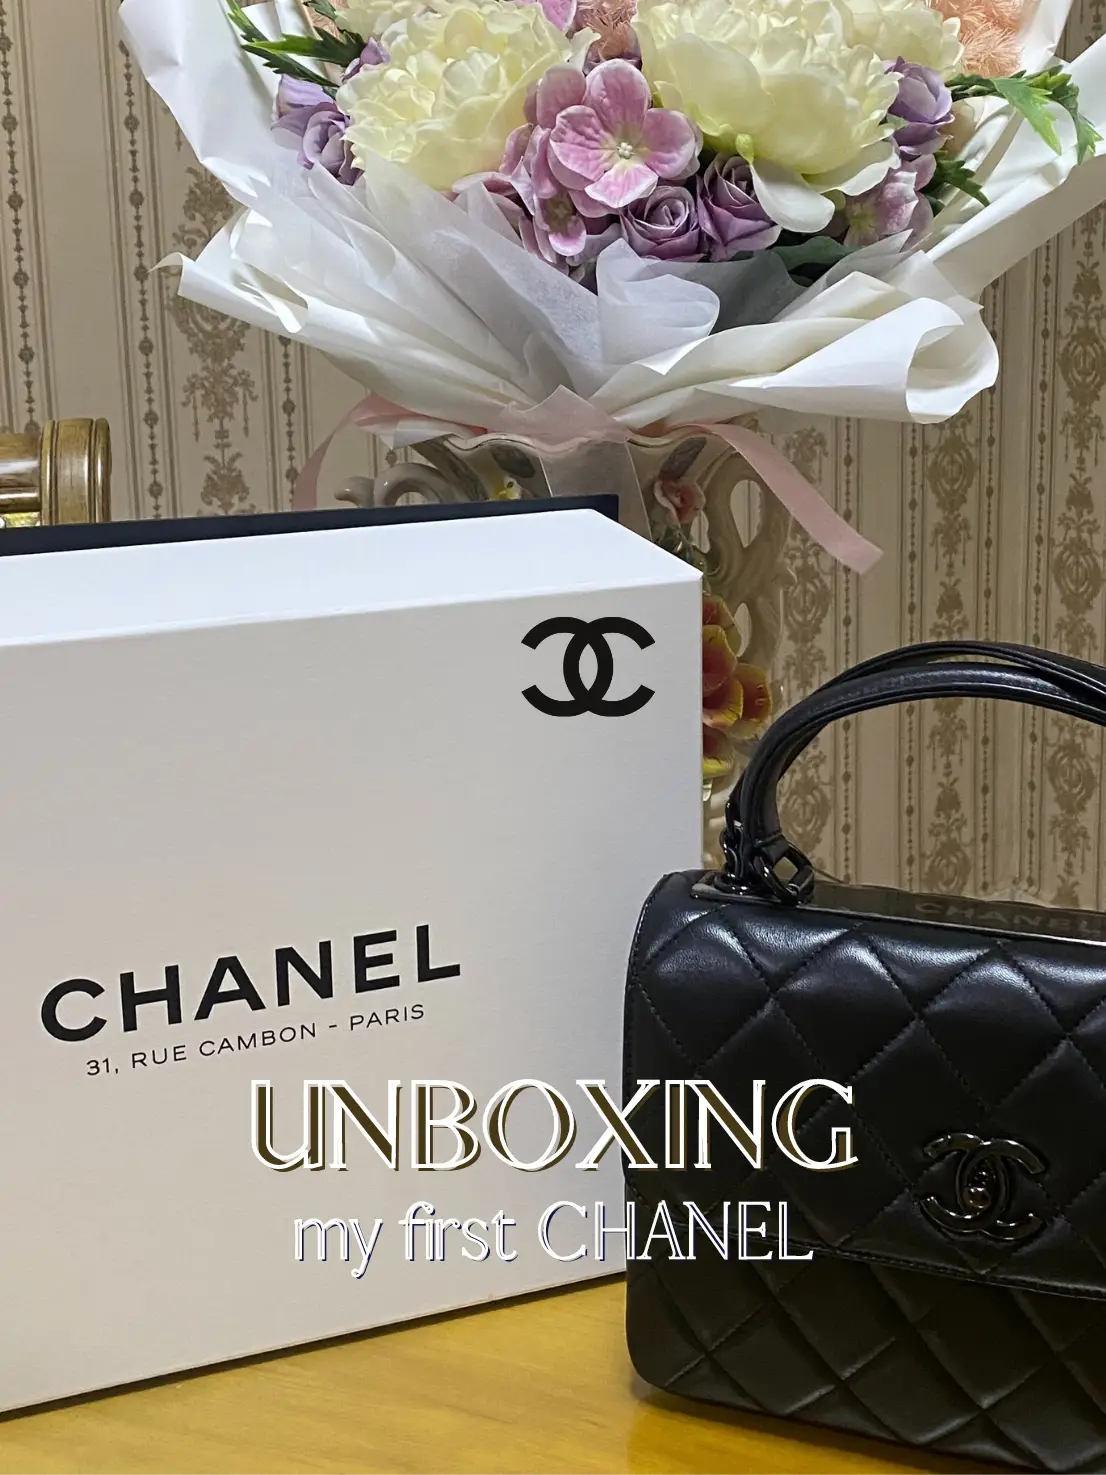 DHGATE CHANEL BAG UNBOXING & REVIEW